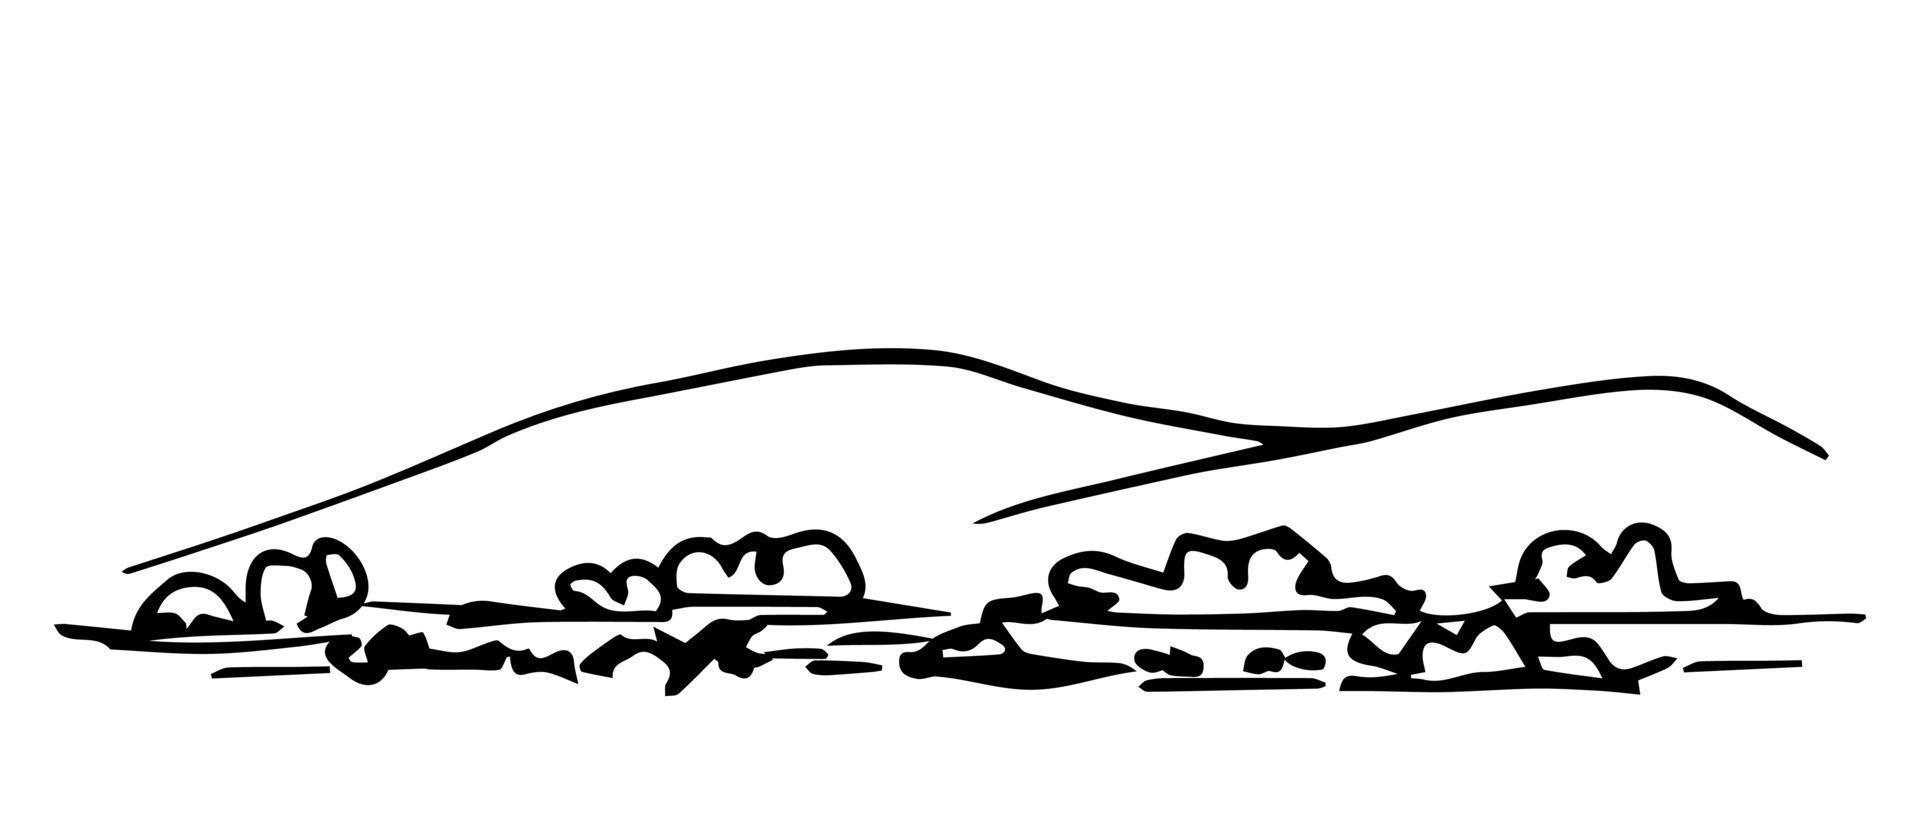 Simple hand-drawn black outline vector sketch. Nature, landscape. Hills, mountains on the horizon, stones, bush, grass in the foreground.